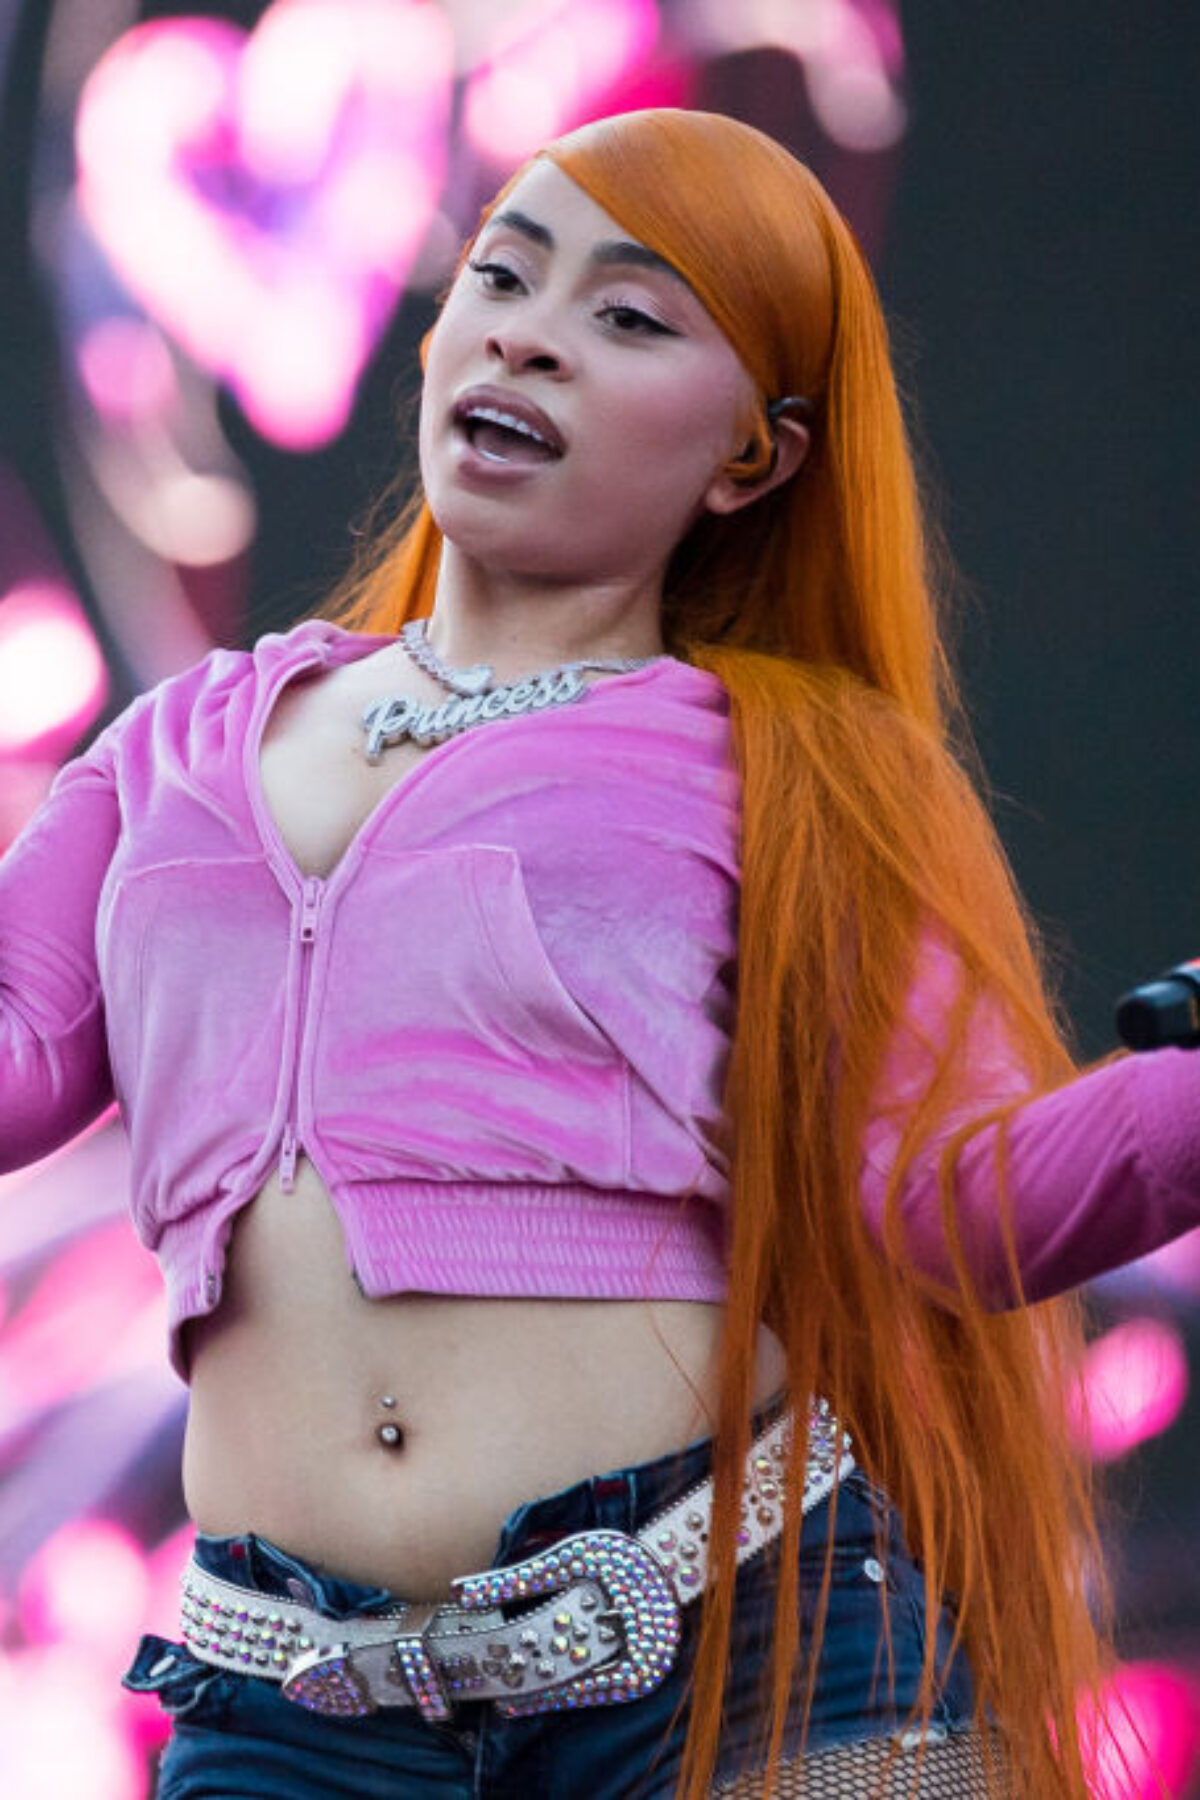 MIAMI GARDENS, FLORIDA - JULY 21: American rapper Ice Spice performs onstage during day one of Rolling Loud Miami at Hard Rock Stadium on July 21, 2023 in Miami Gardens, Florida. (Photo by Jason Koerner/Getty Images)